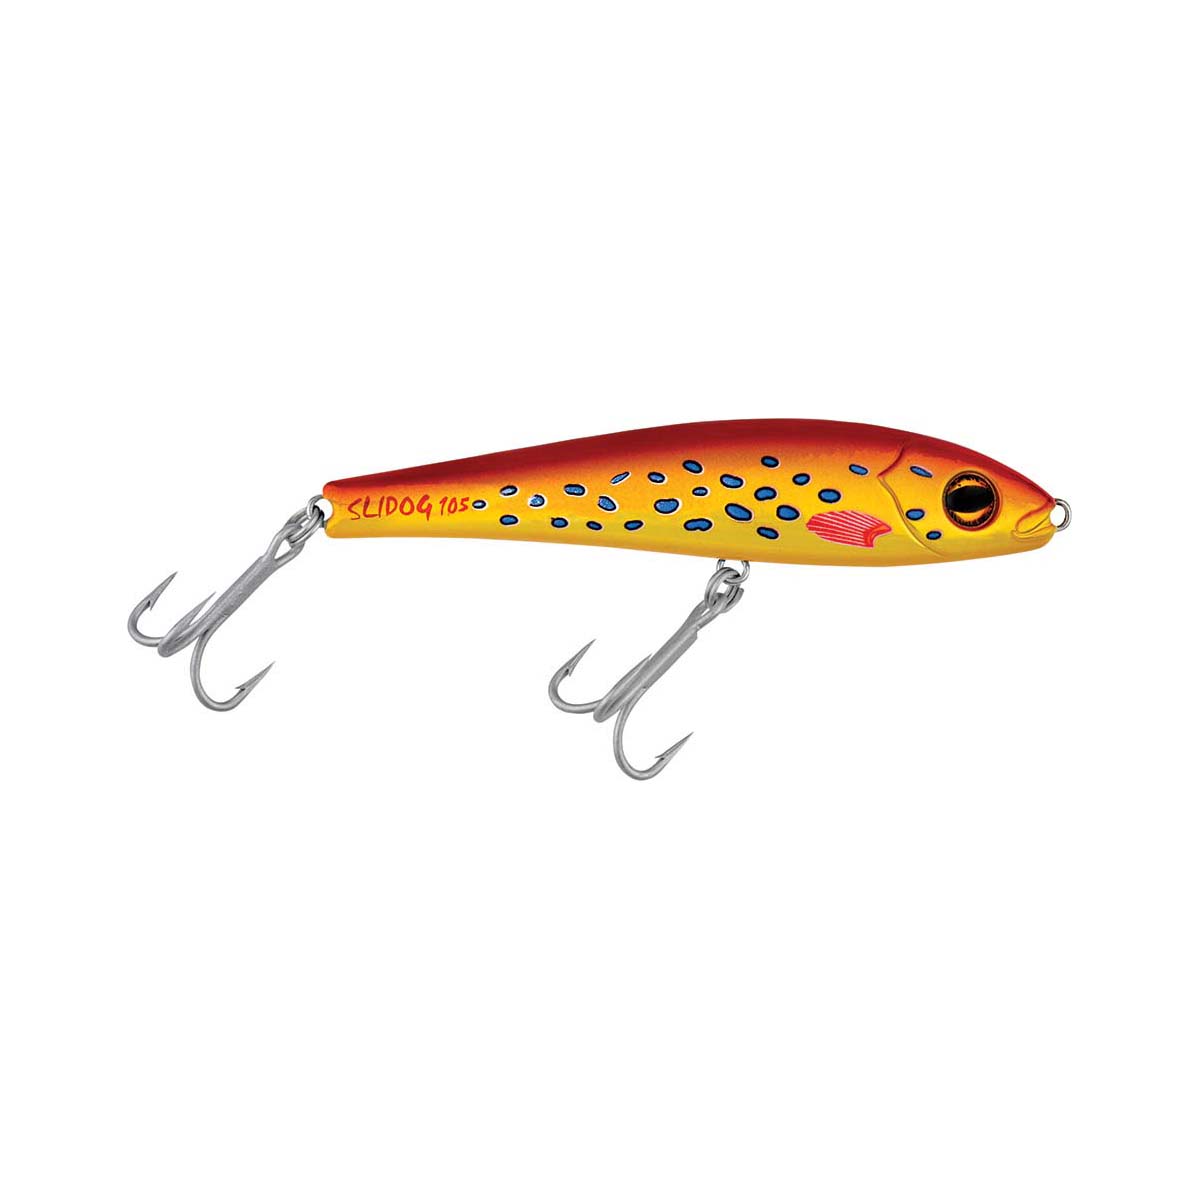 Halco Slidog Heavy Bluwater Stick Bait Lure 105mm Coral Trout